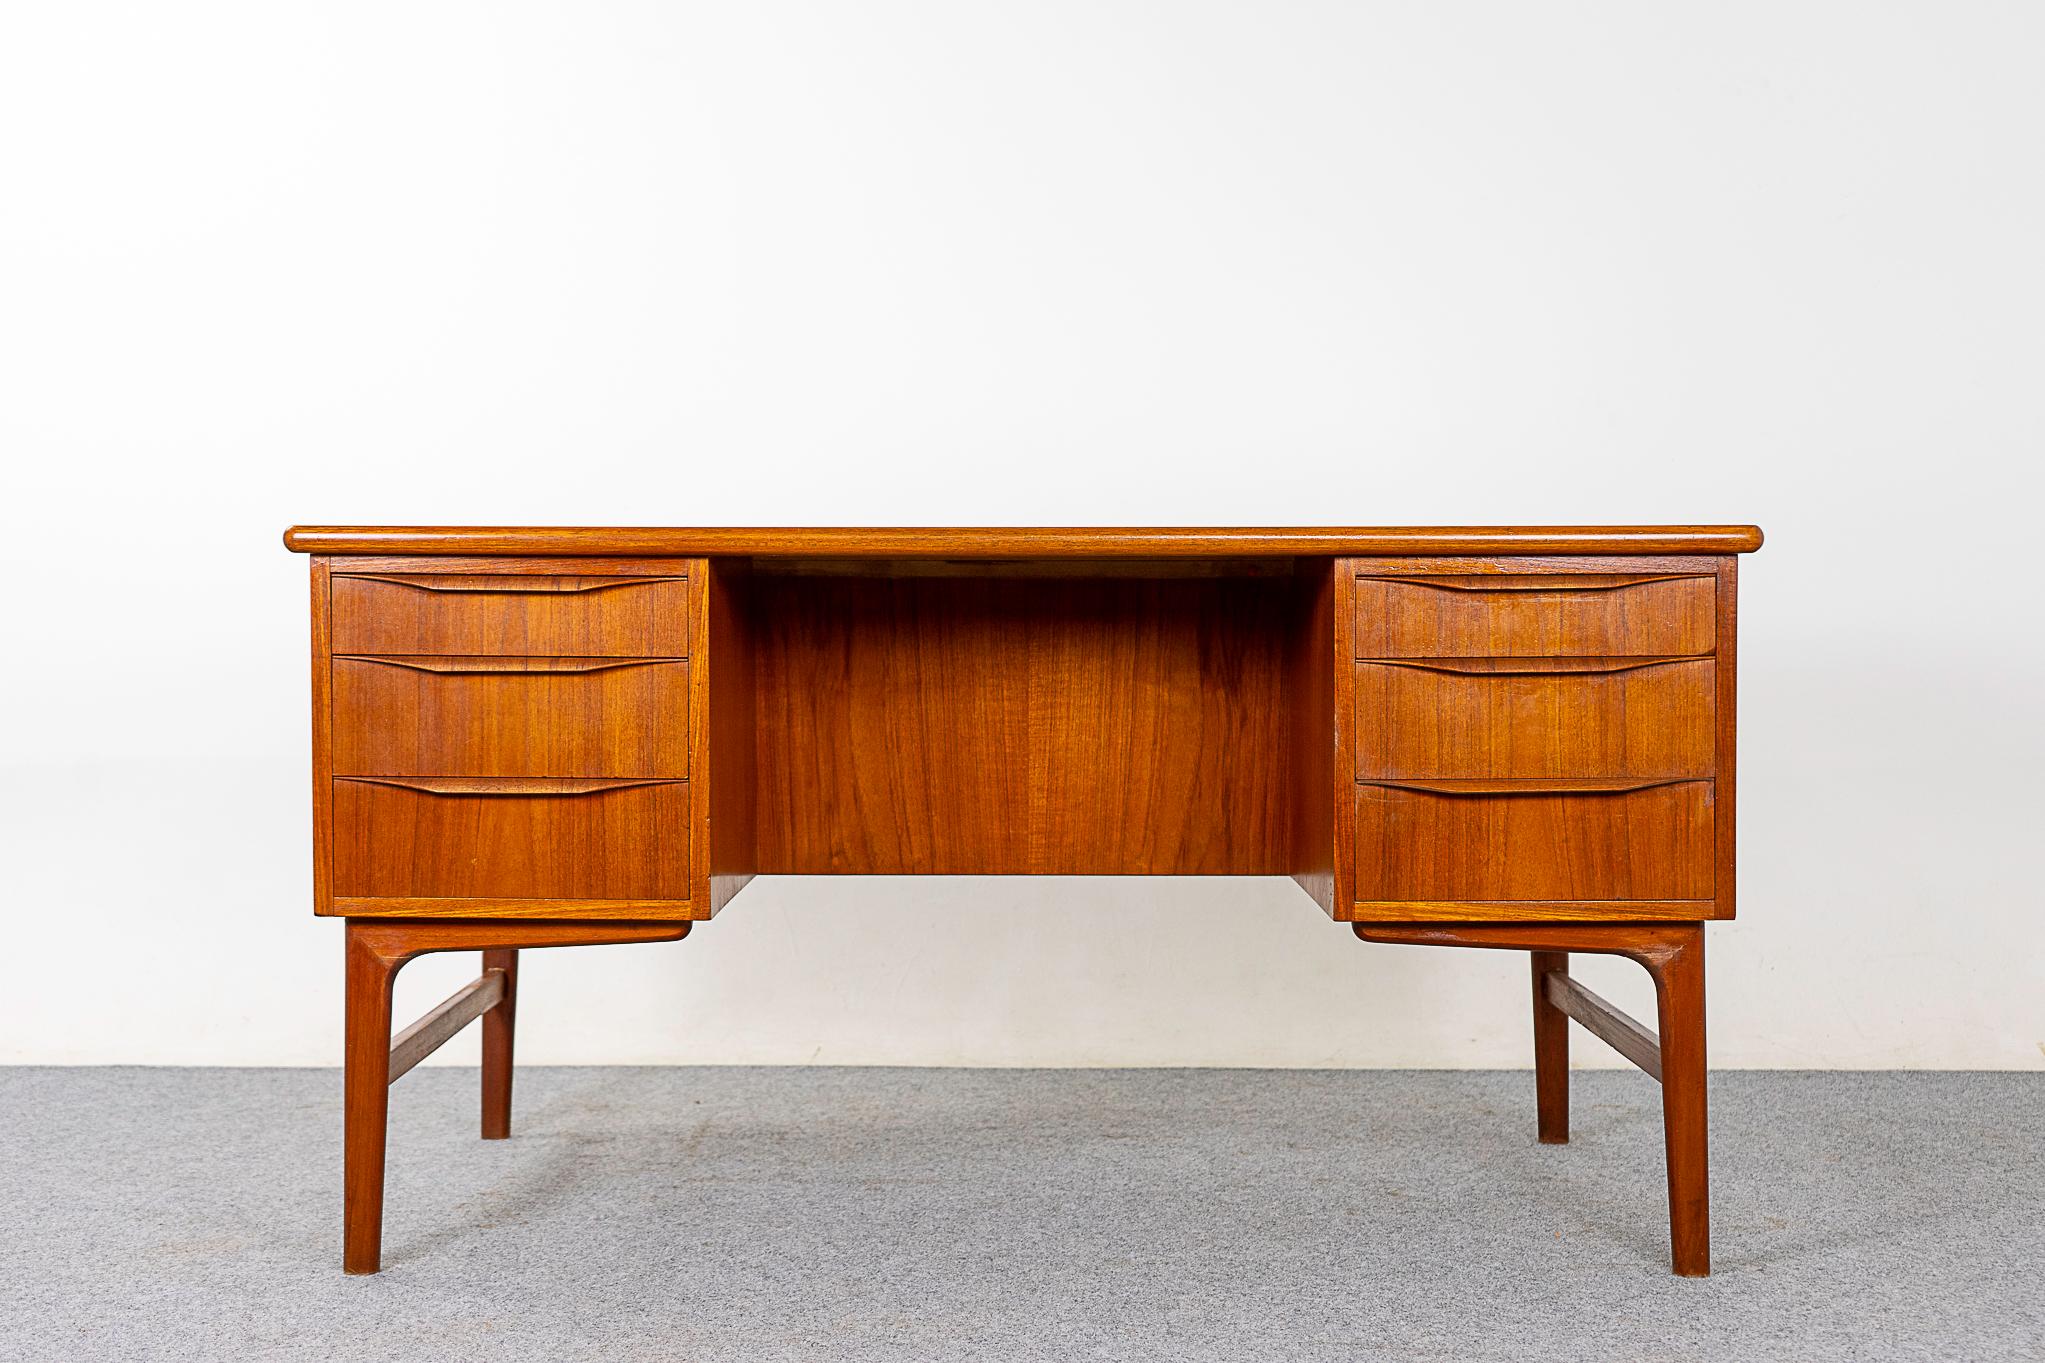 Danish Modern teak writing desk, circa 1960s. Writing desk finished on both sides, this desk can be placed in the center of a room and look fantastic on all sides. Hand formed curved drawer pulls offer ease of use when opening desk